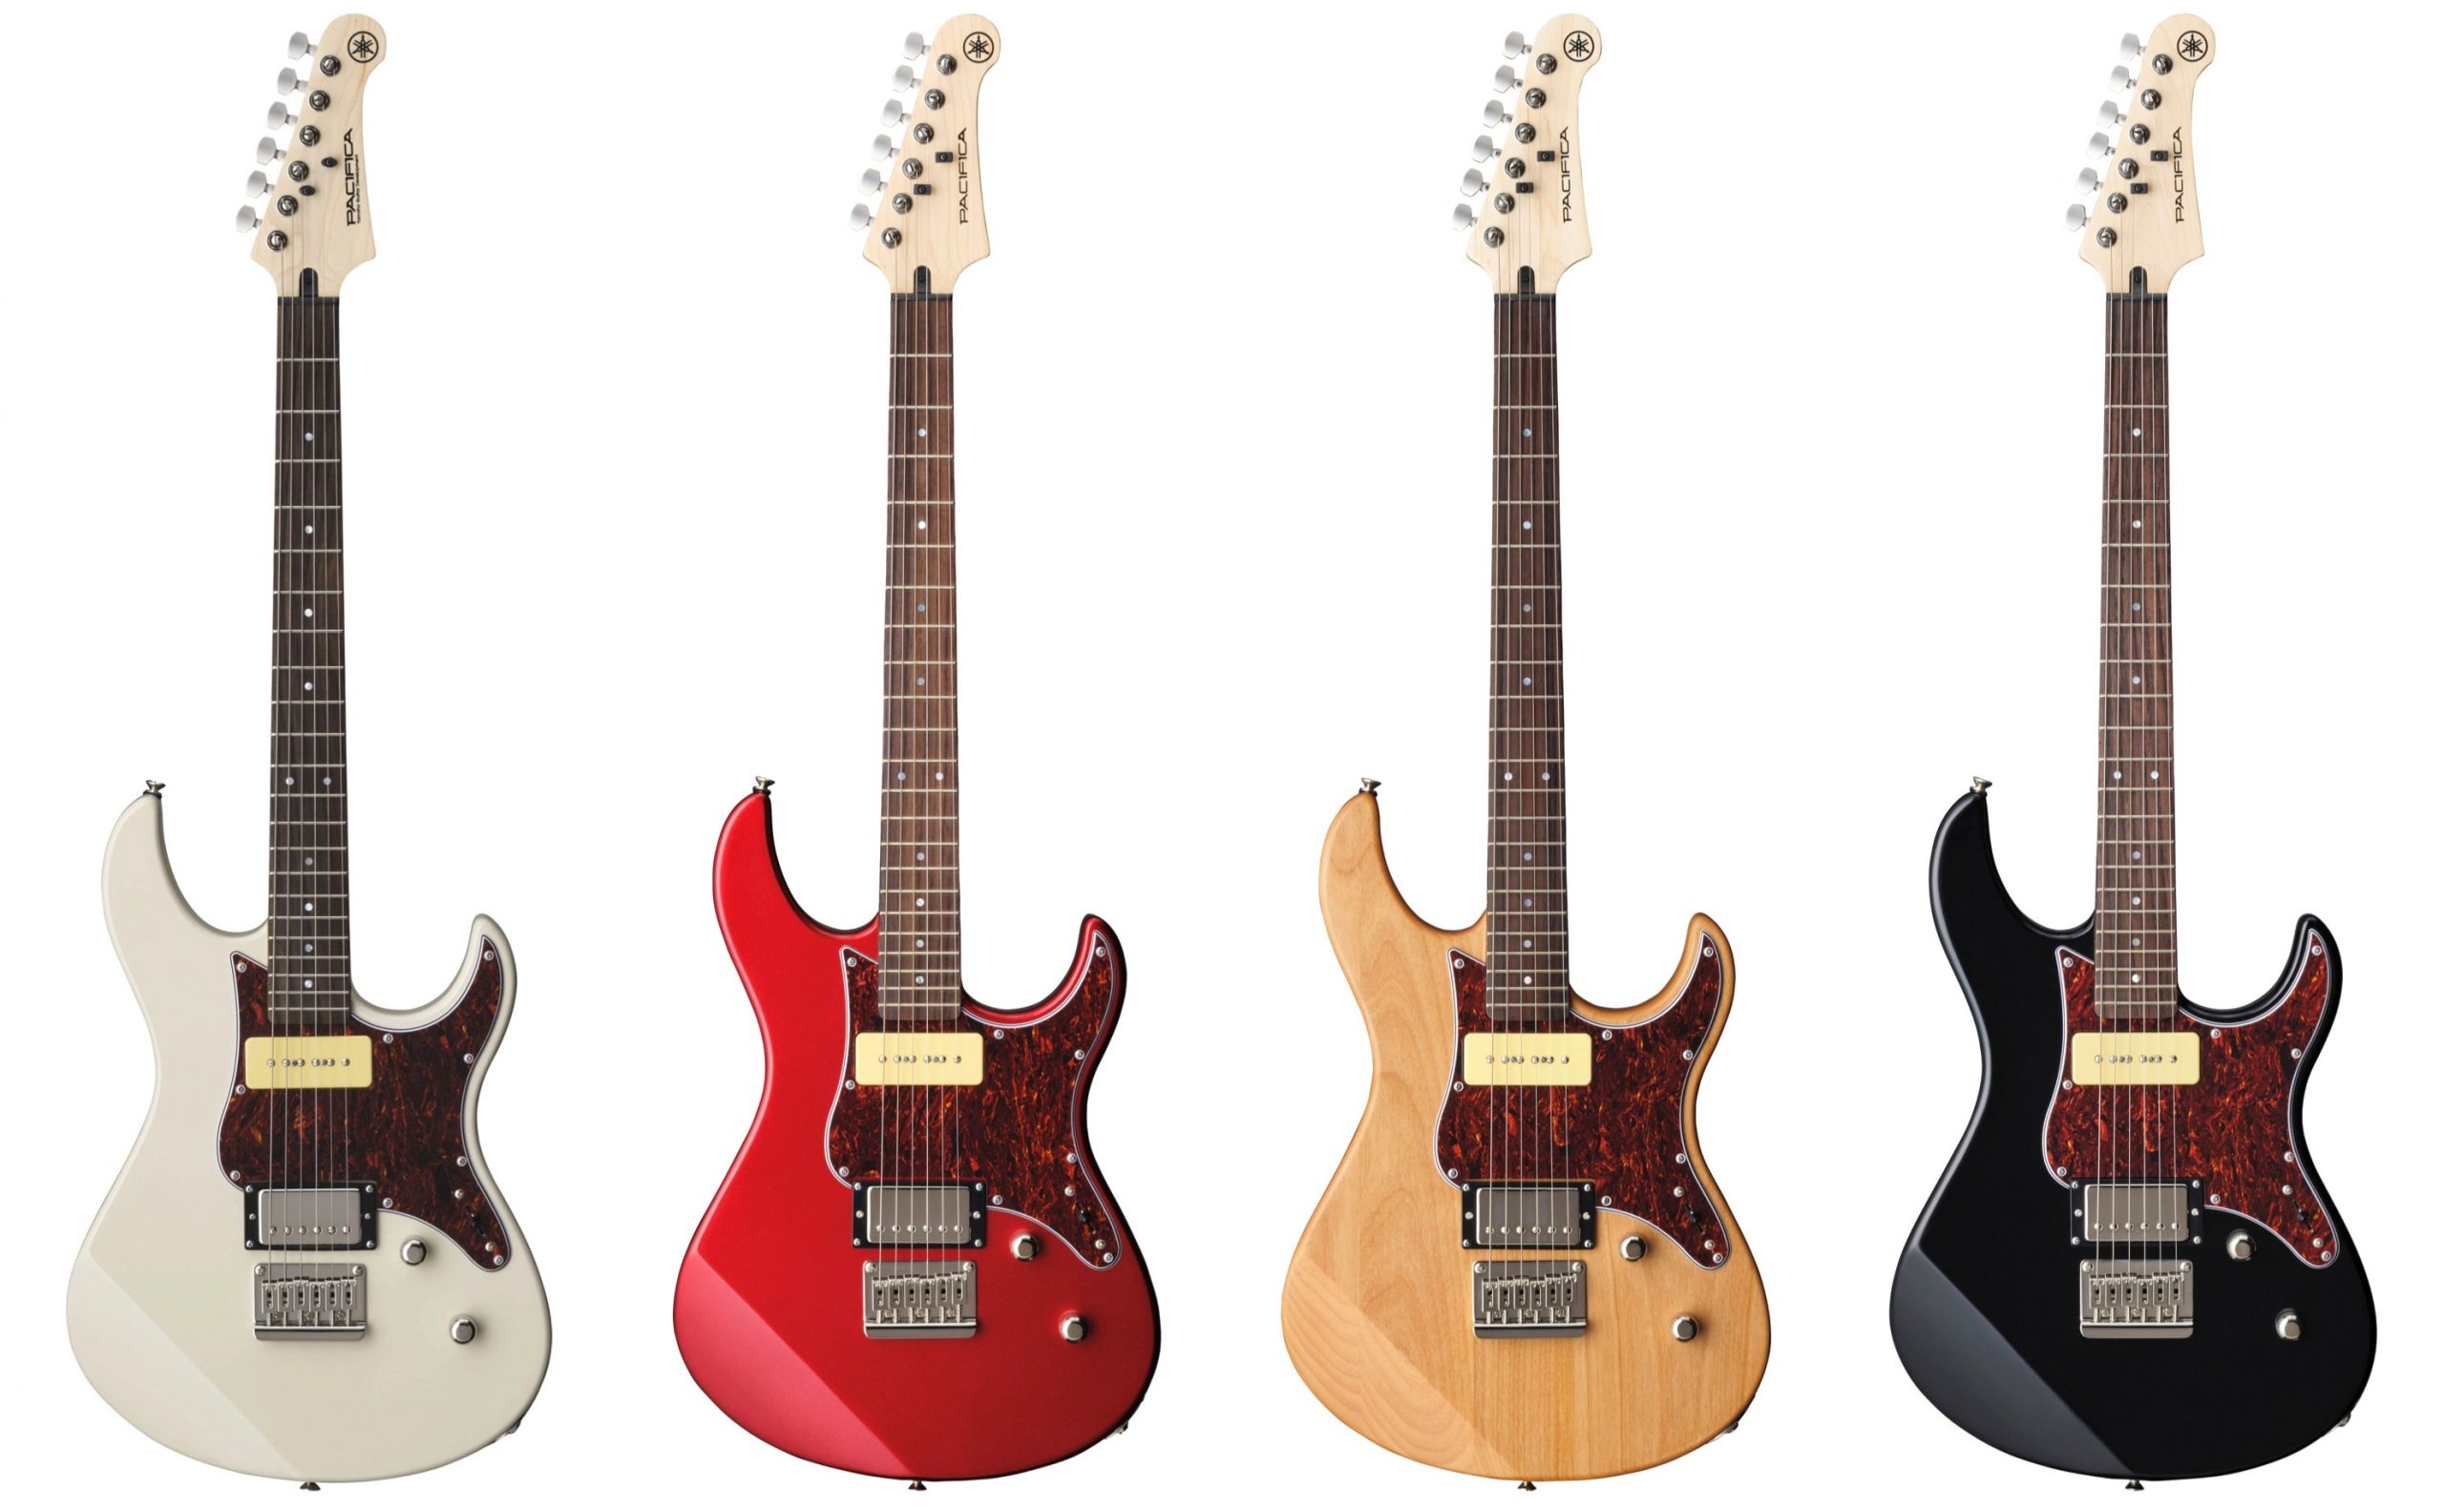 Four different colors of a guitar.